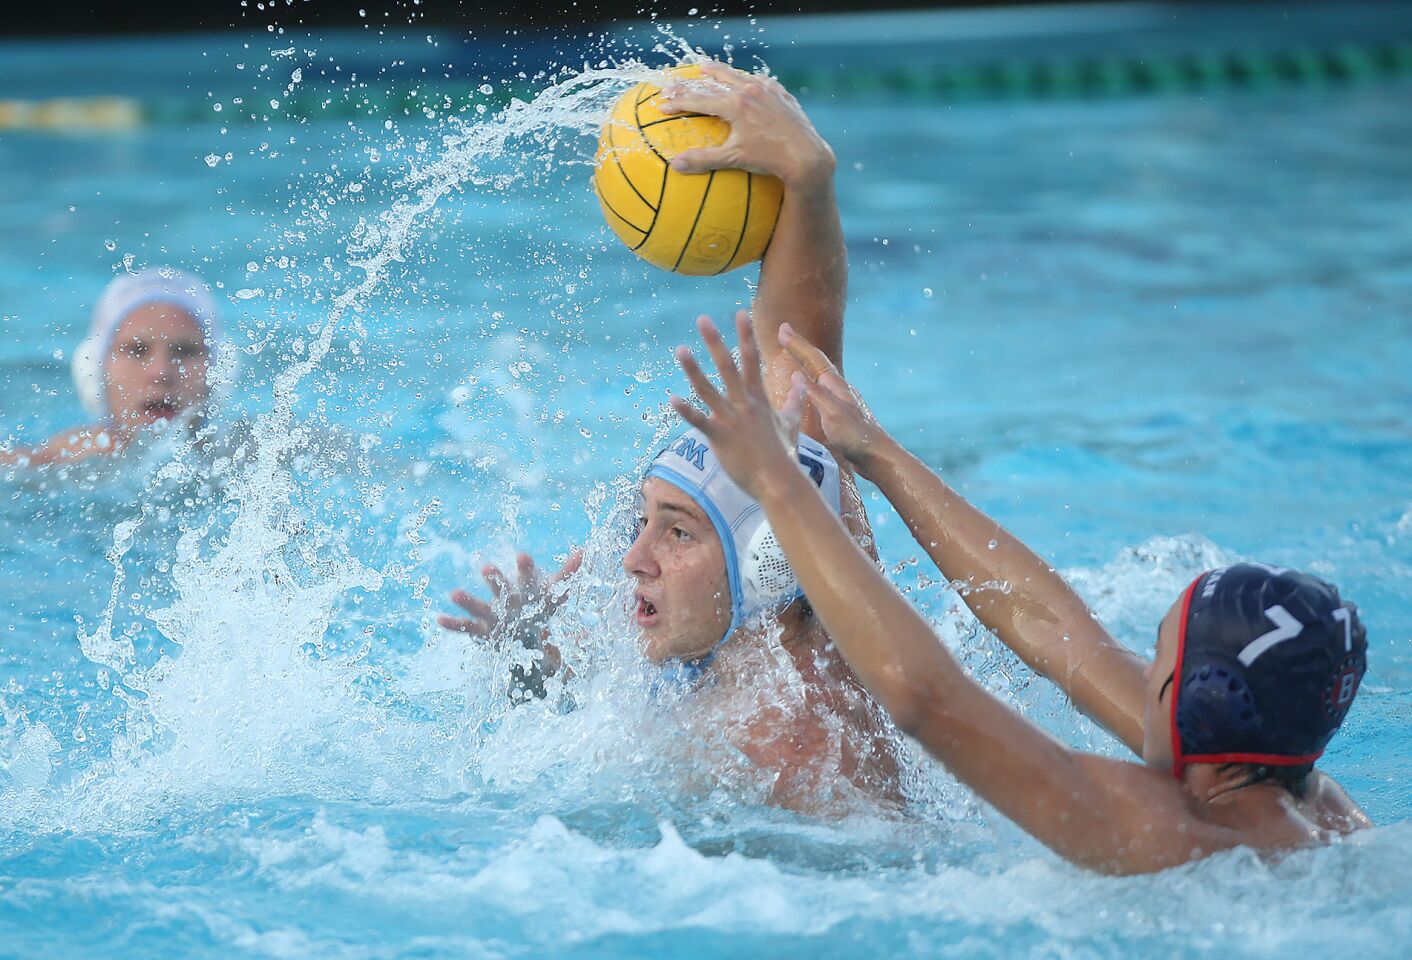 Corona Del Mar High's Matt Ueberroth takes a shot as the defense closes from Beckman's Richard Yoon (7) during wild-card round of the CIF Southern Section Division 2 playoffs at Beckman on Tuesday.